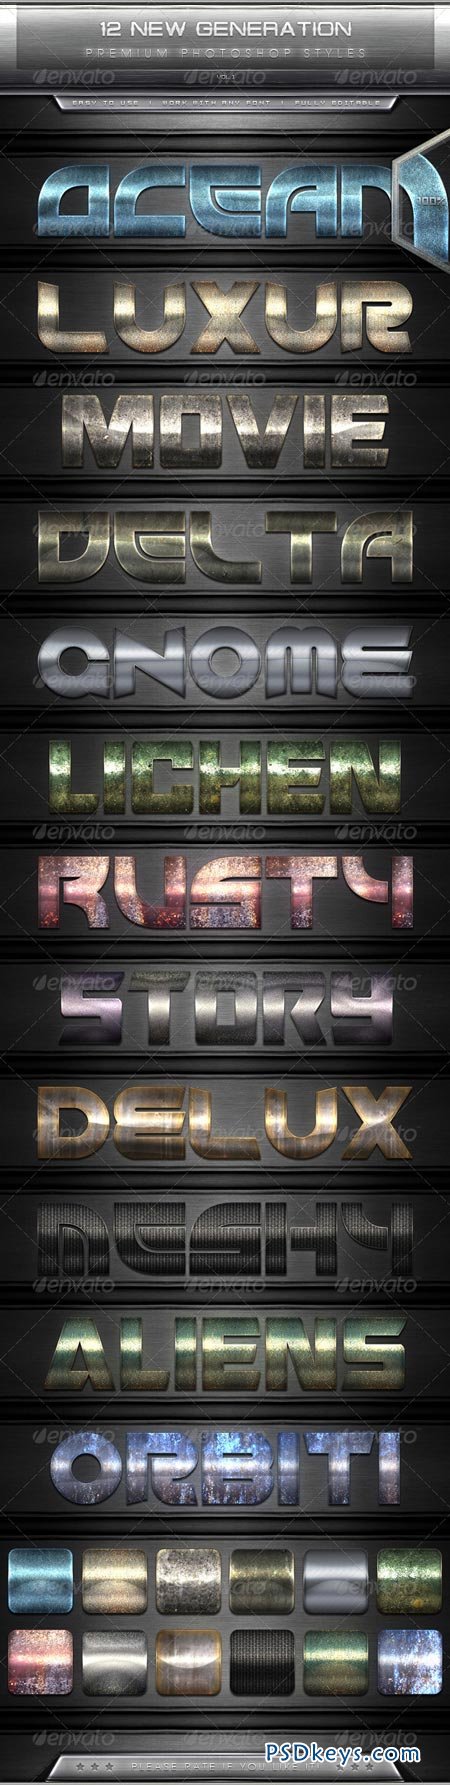 12 New Generation Text Effect Styles Vol.1 7630718